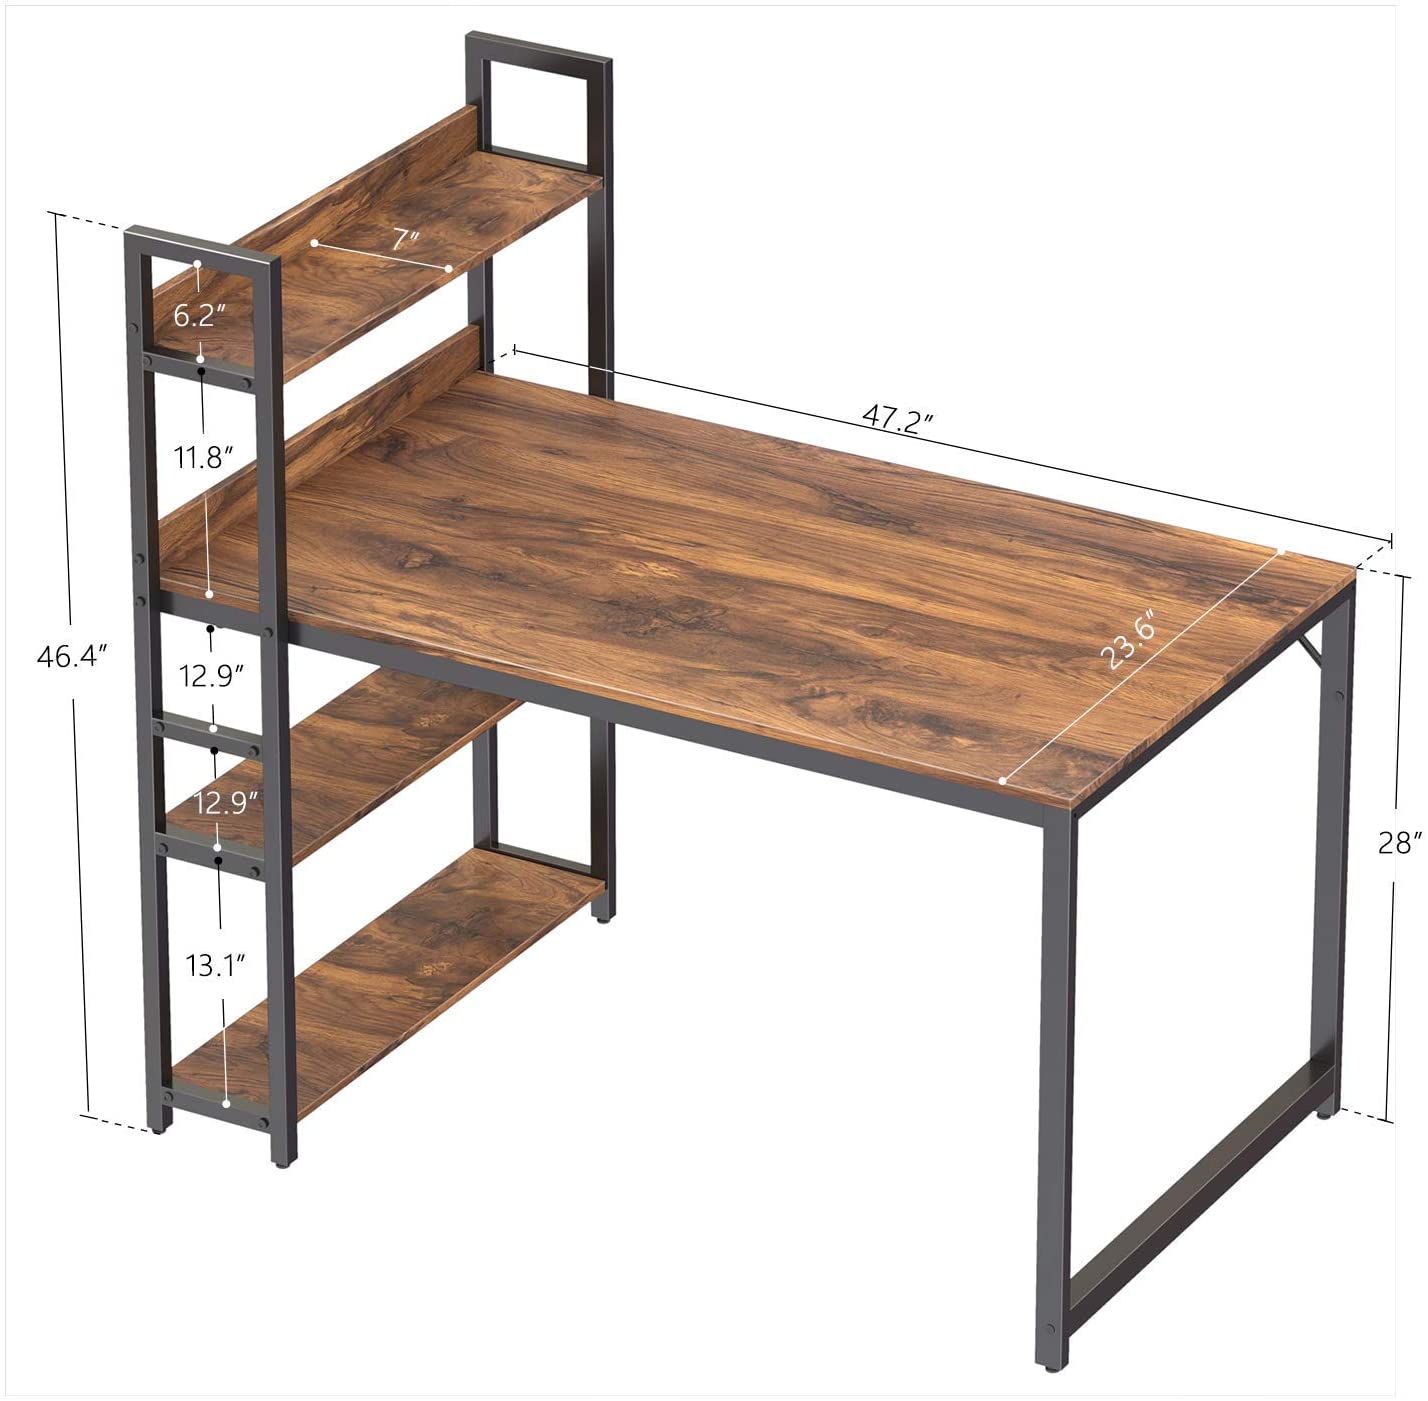 Study Table : Storage Shelves Study Writing Table for Home Office